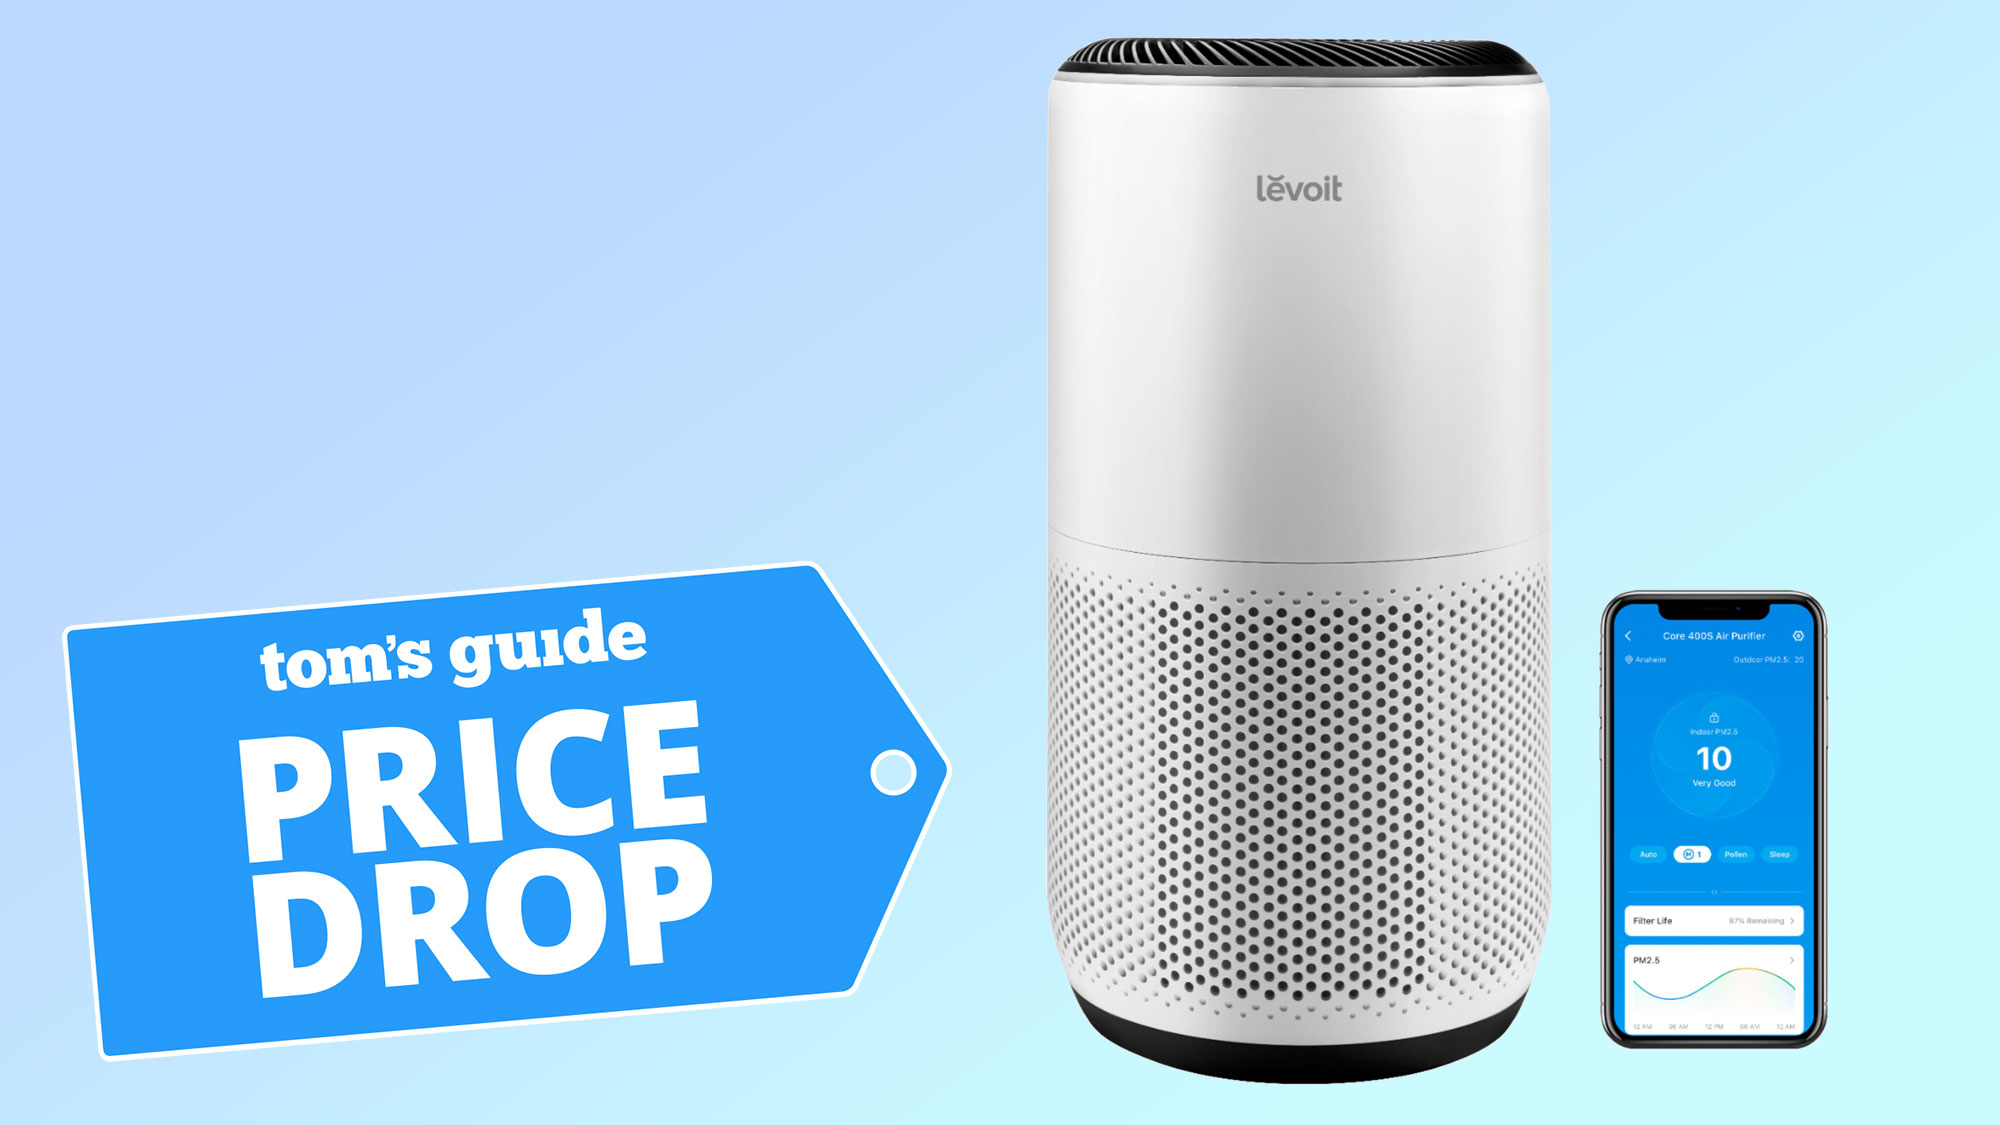 Levoit PlasmaPro 400 Air Purifier With Smartphone Price Drop Badge